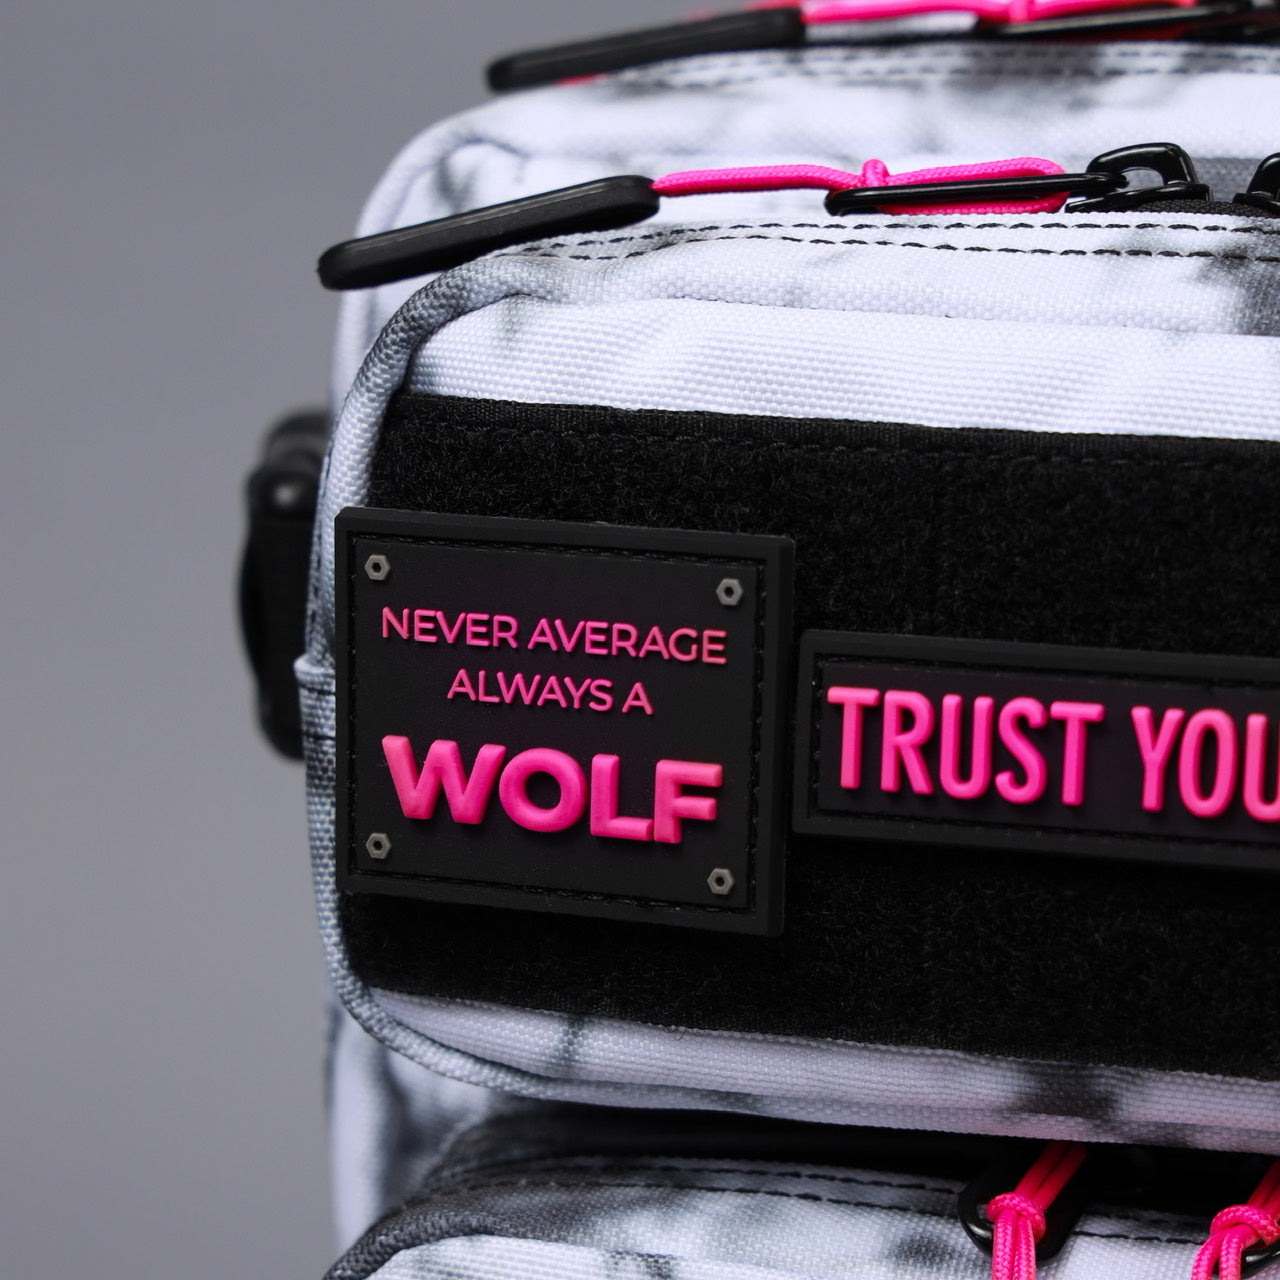 9L Backpack Mini Timber Wolf Magenta Pink